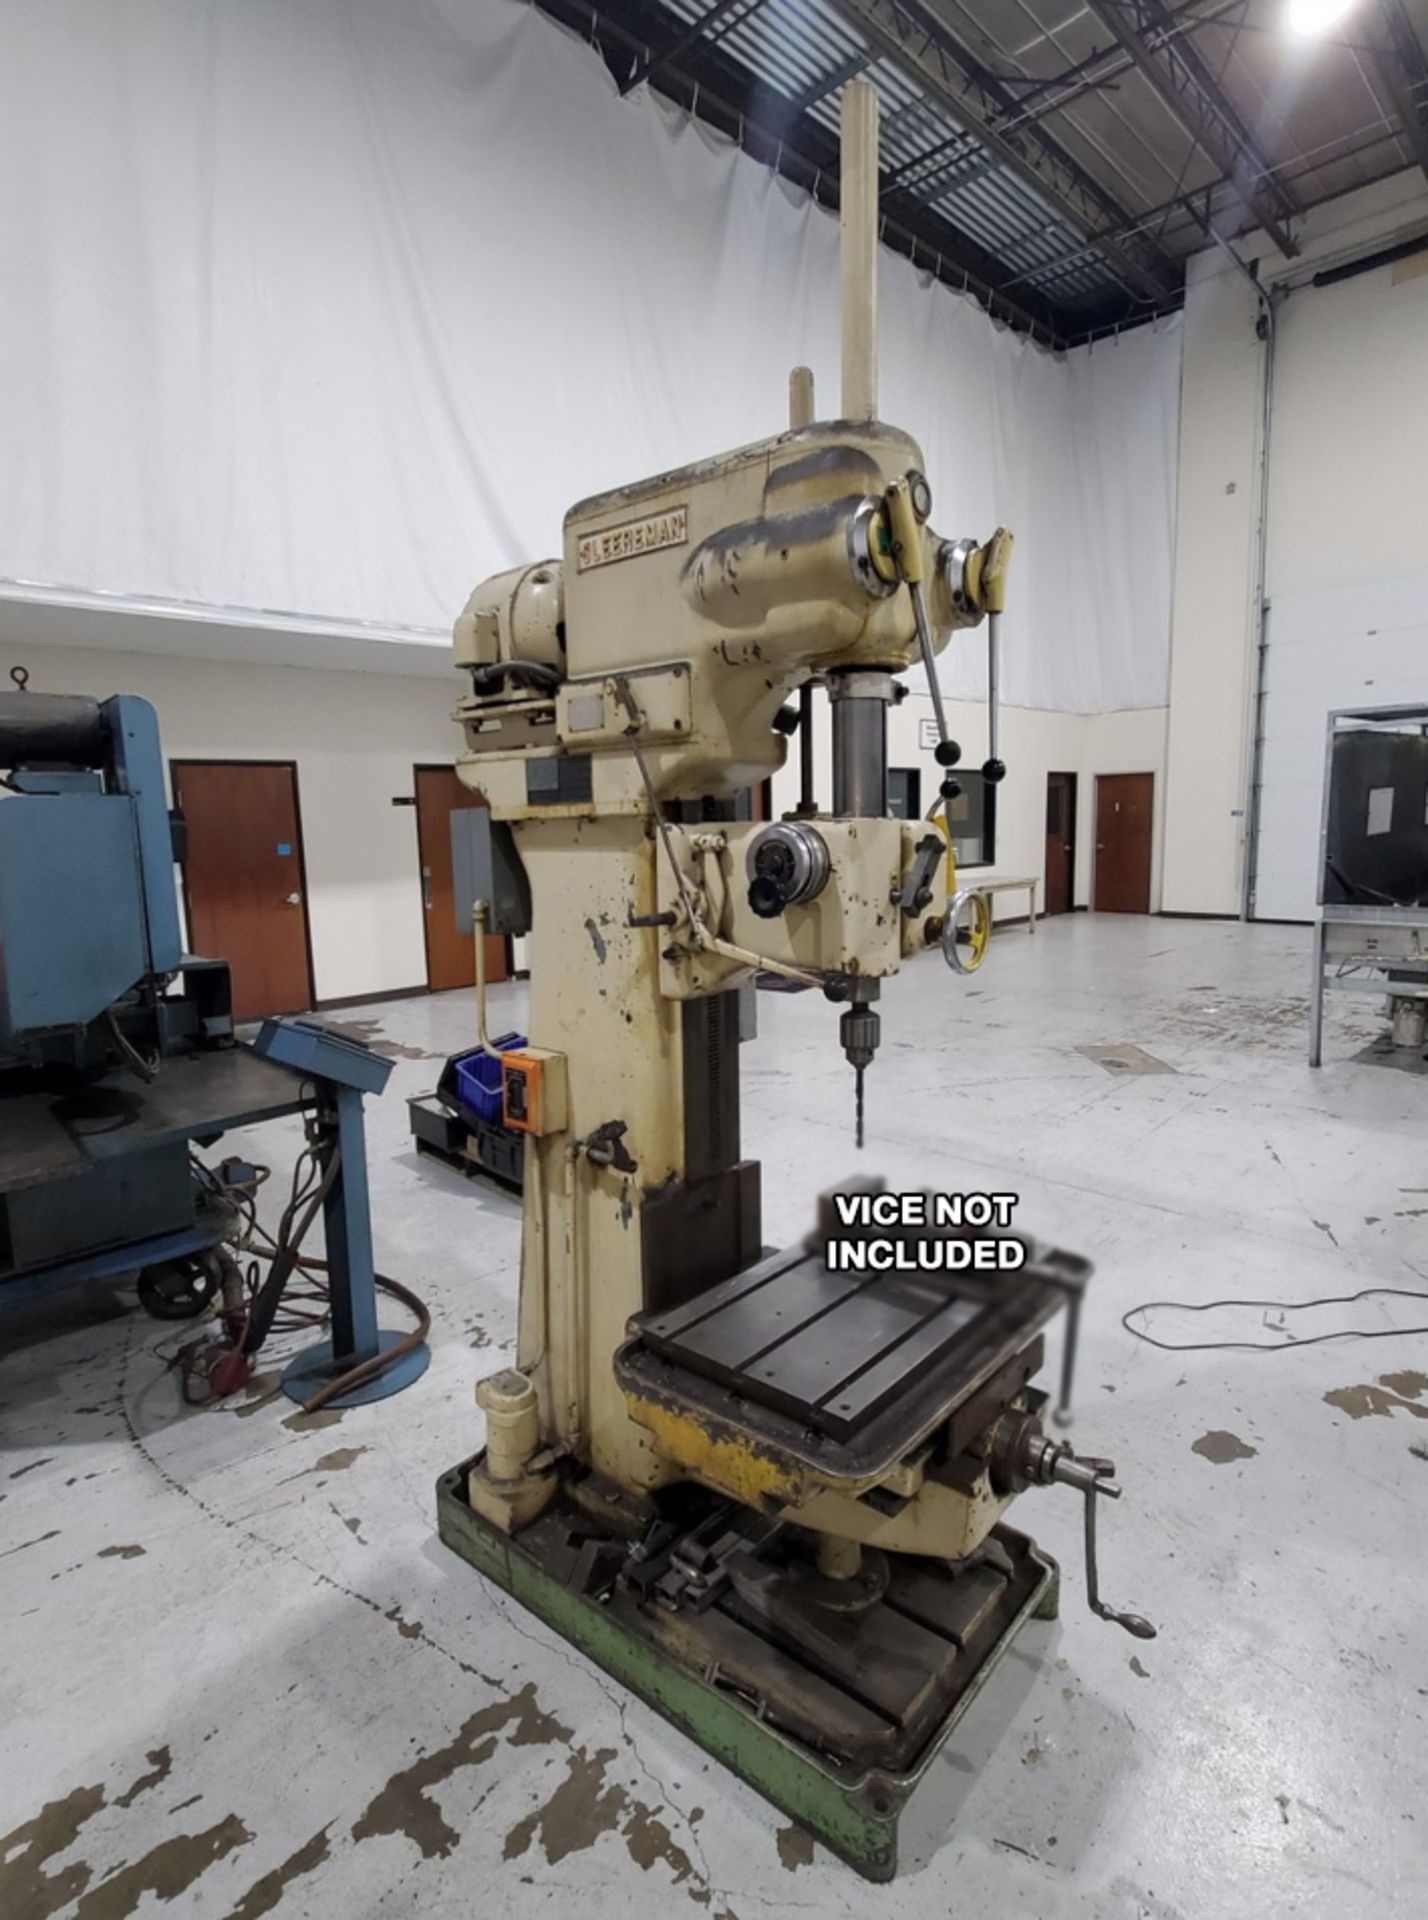 Cleerman 28" Drill Press (No Tag) 480V; 30" x 16-1/2" Slot Table; VICE NOT INCLUDED - Image 2 of 19